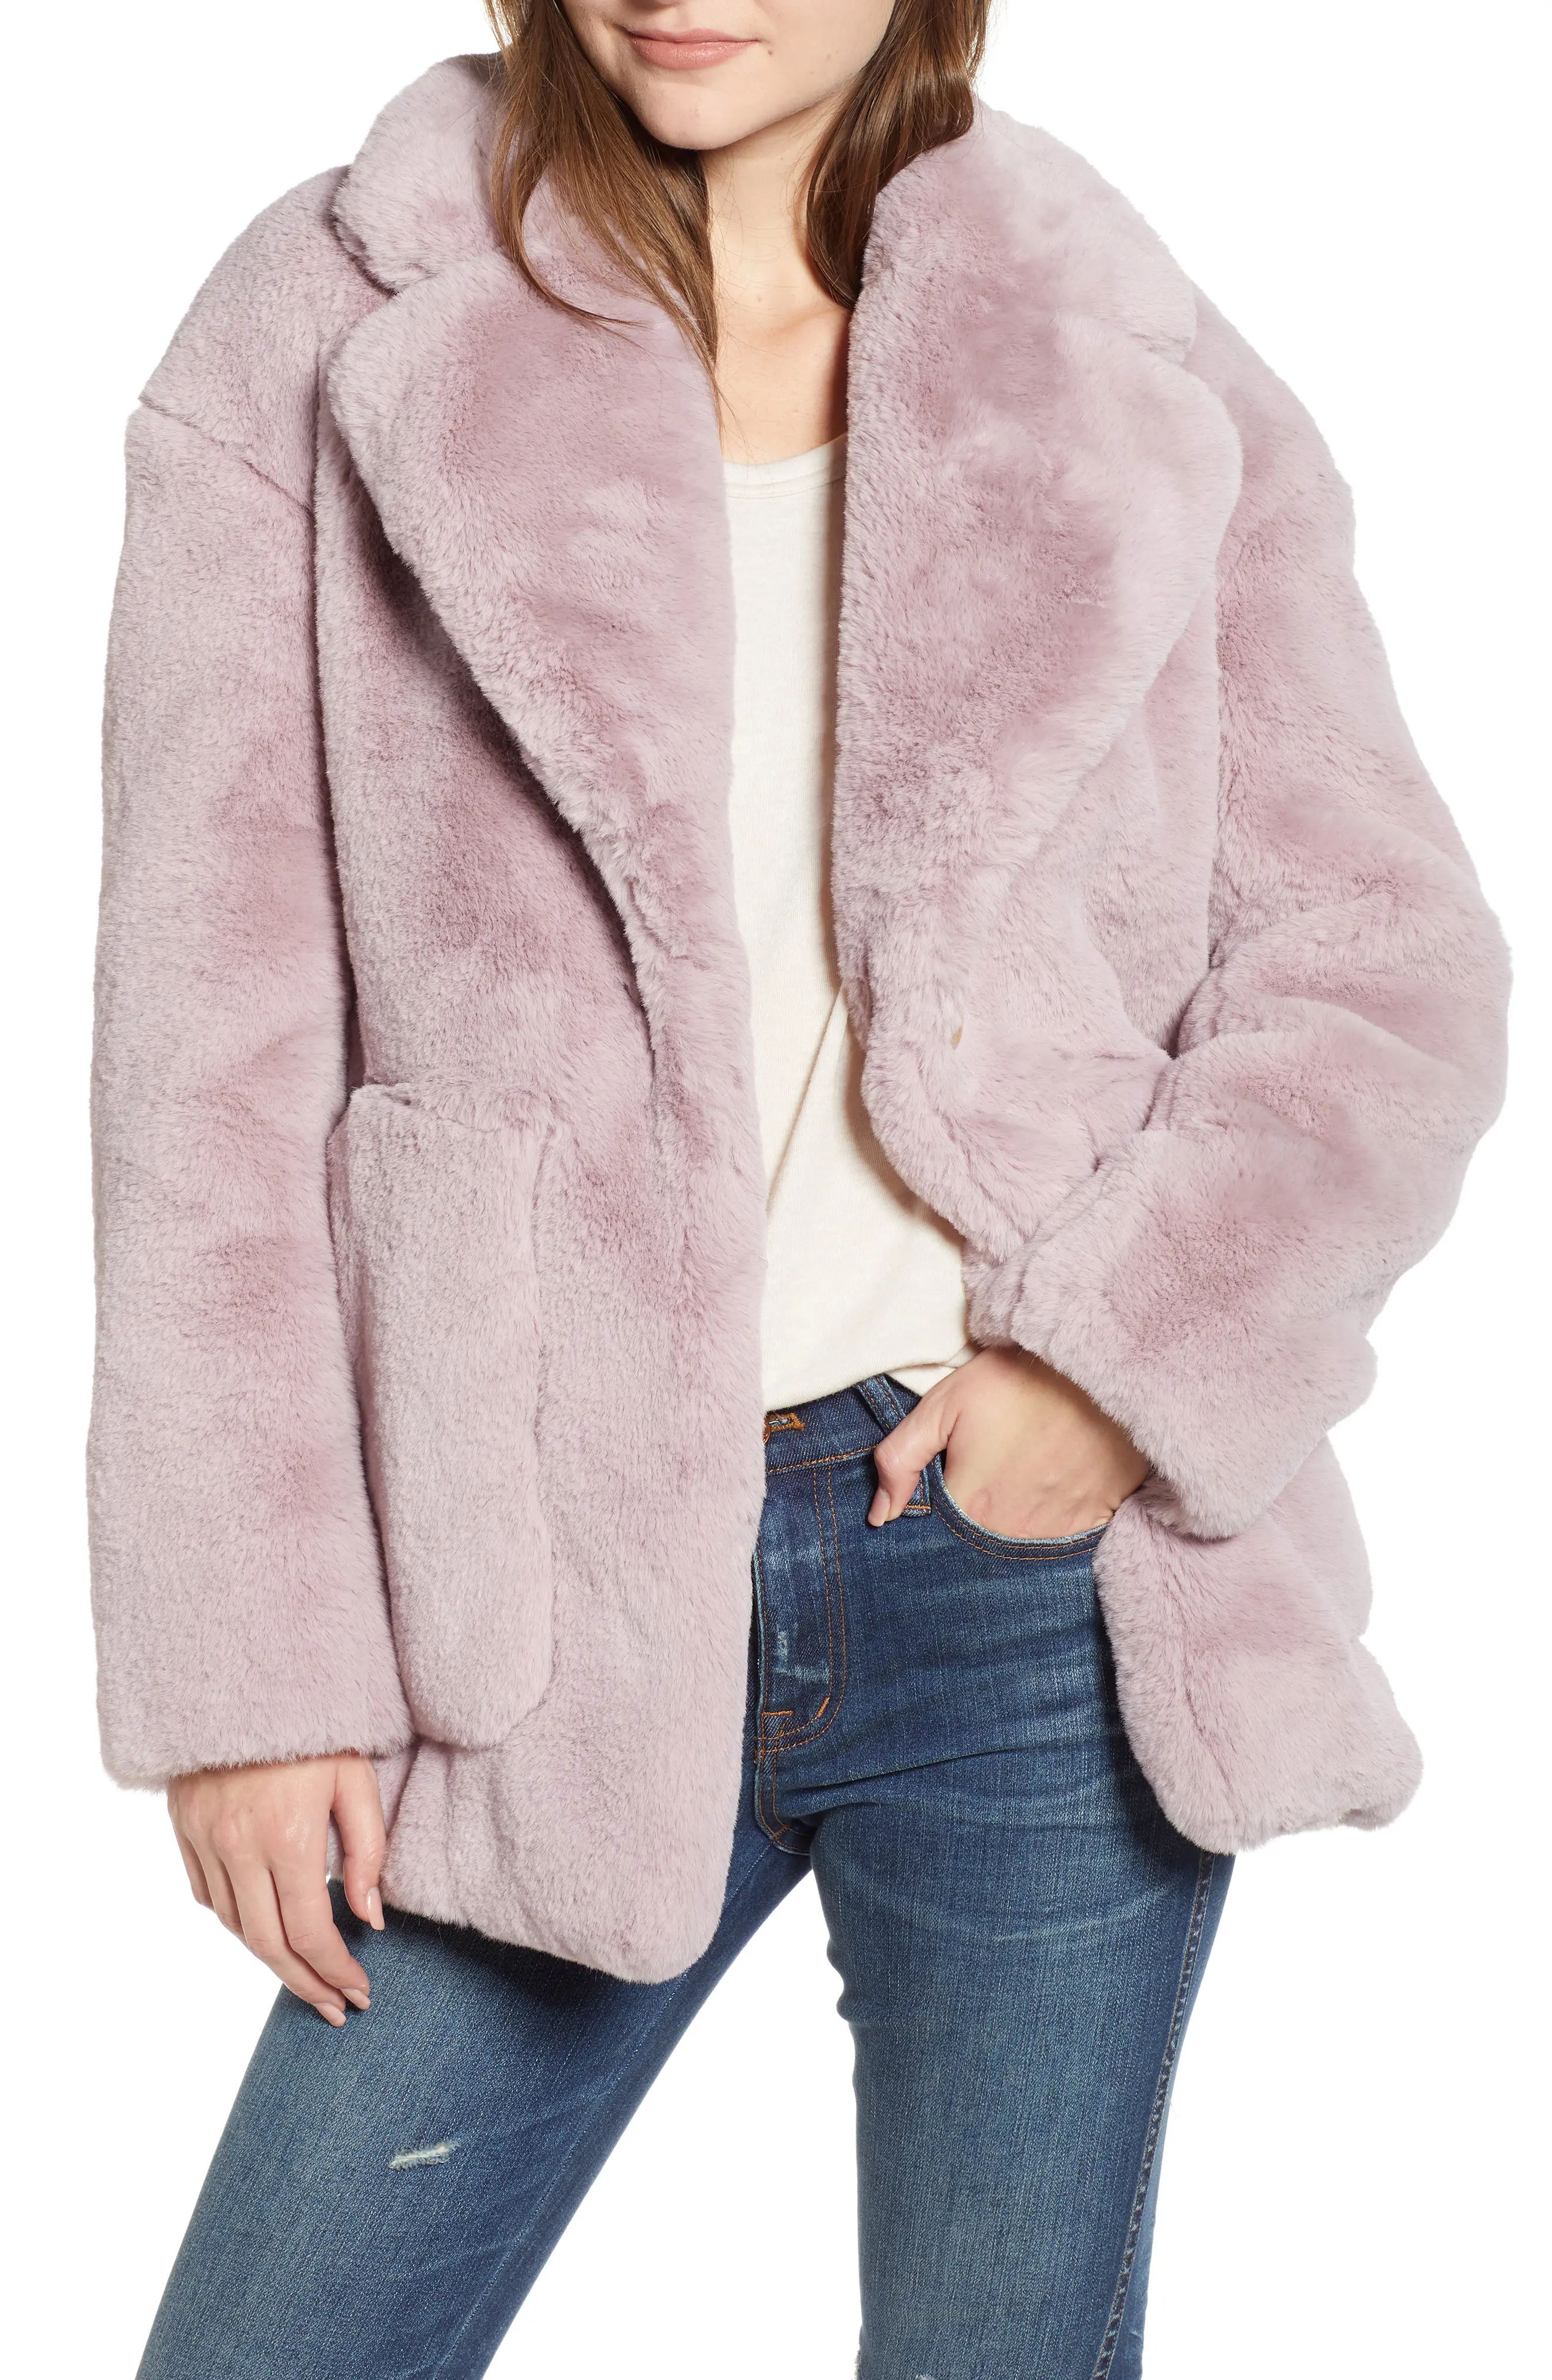 Madewell Faux Fur Coat | Nordstrom